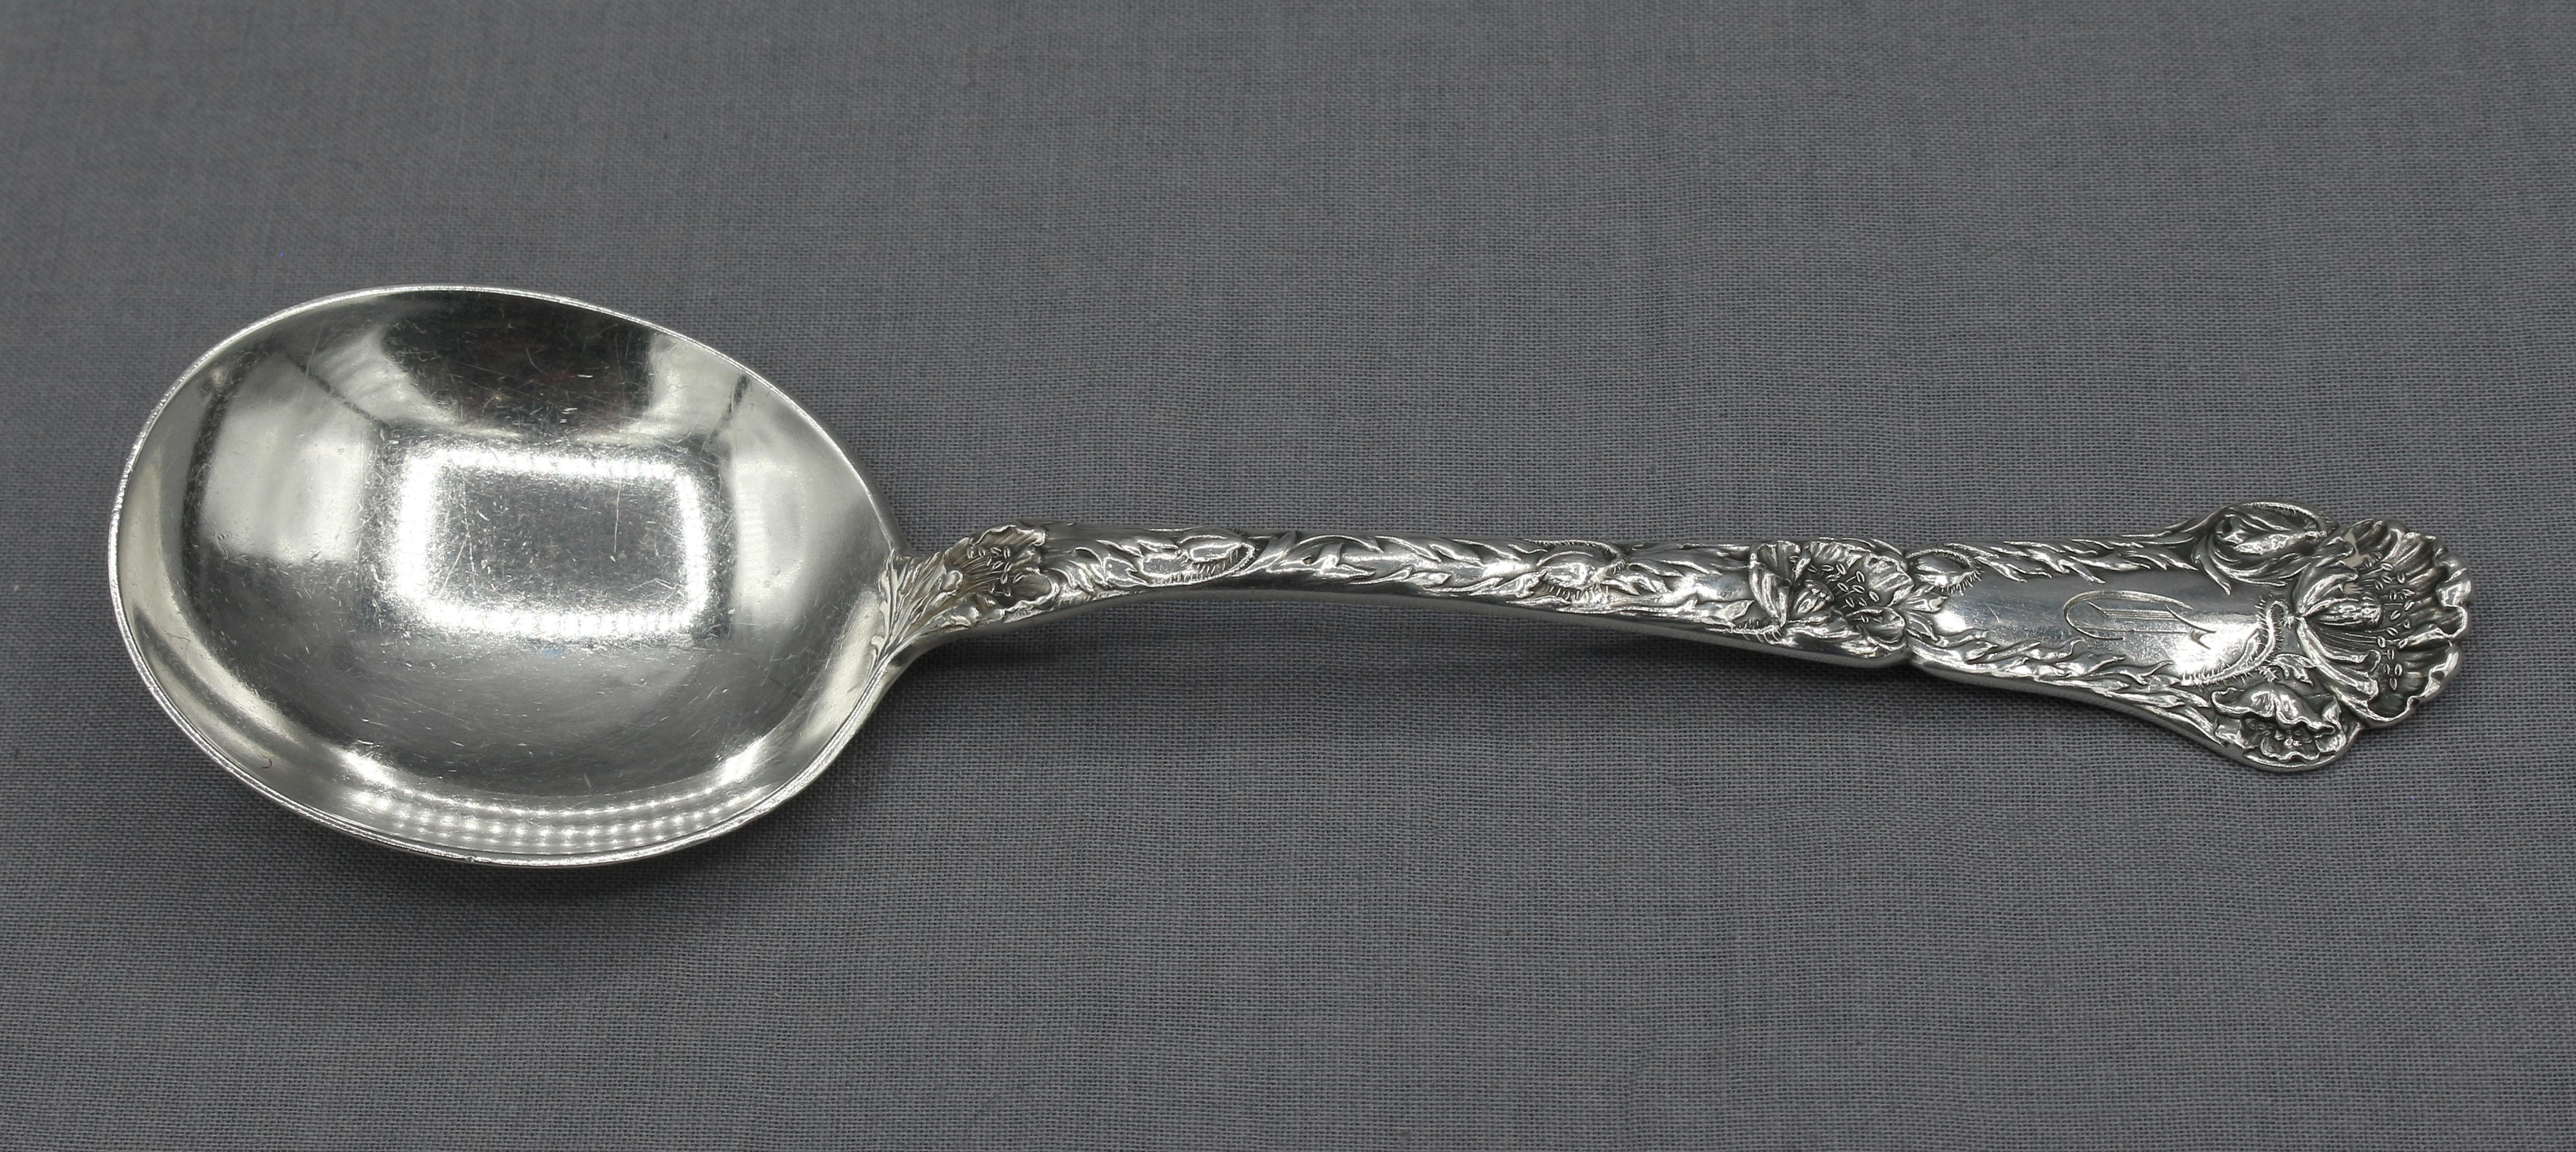 Set of 12 Art Nouveau sterling silver gumbo spoons by Gorham, c.1905-10. Poppy pattern of 1902. Monogram 